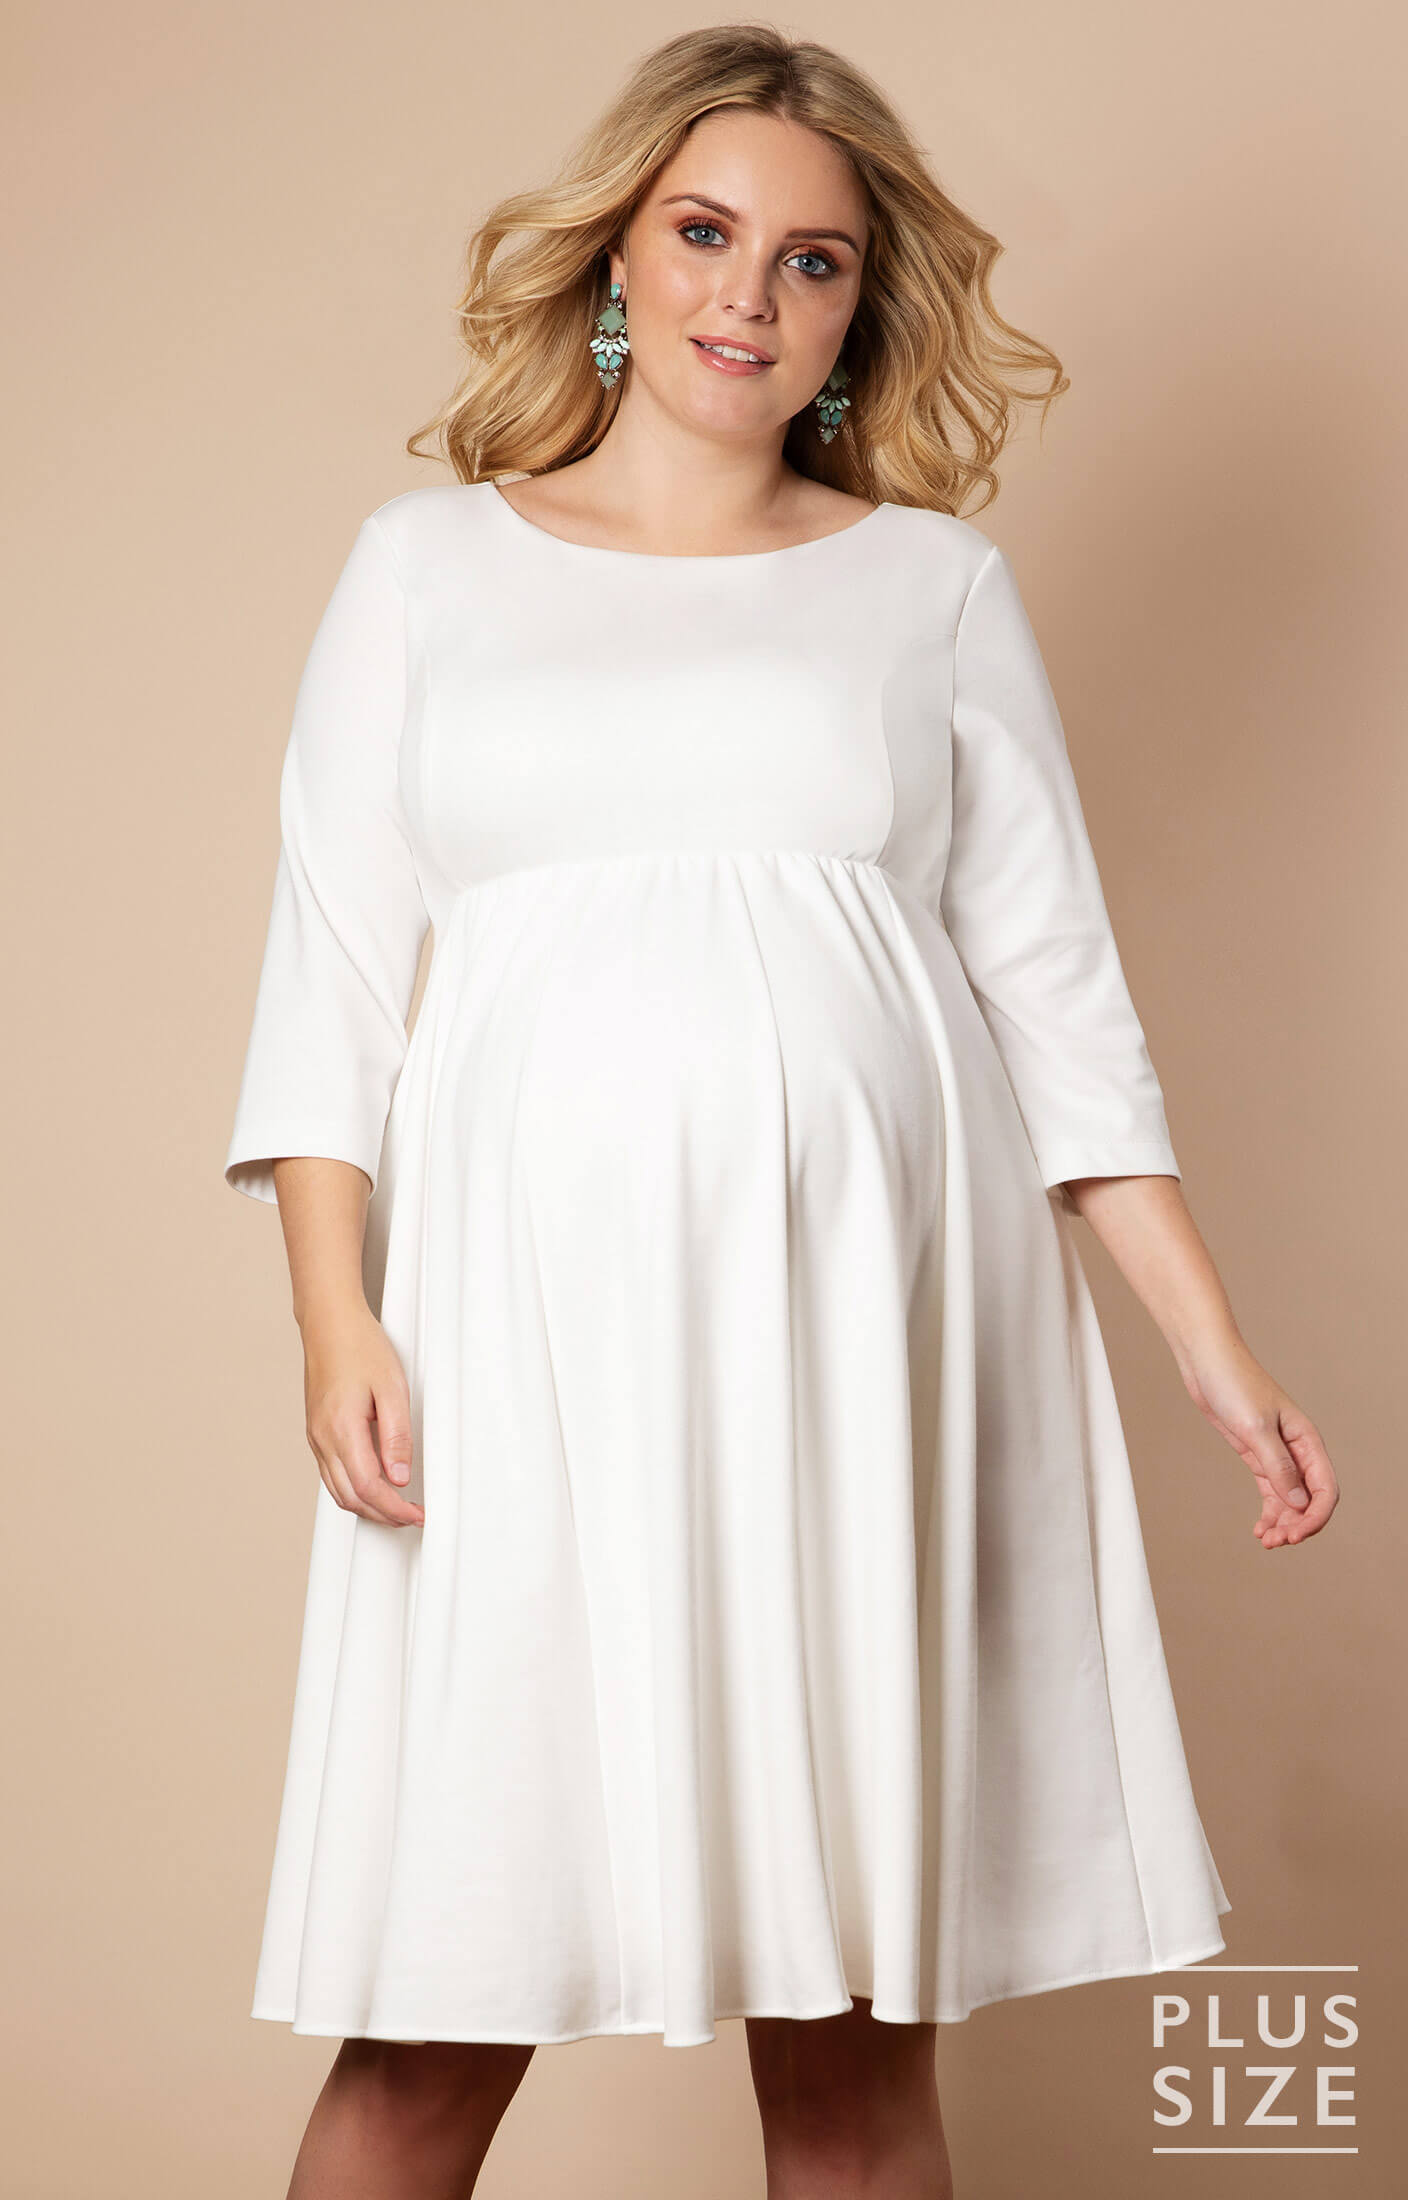 Plus Size Maternity Gowns | lupon.gov.ph